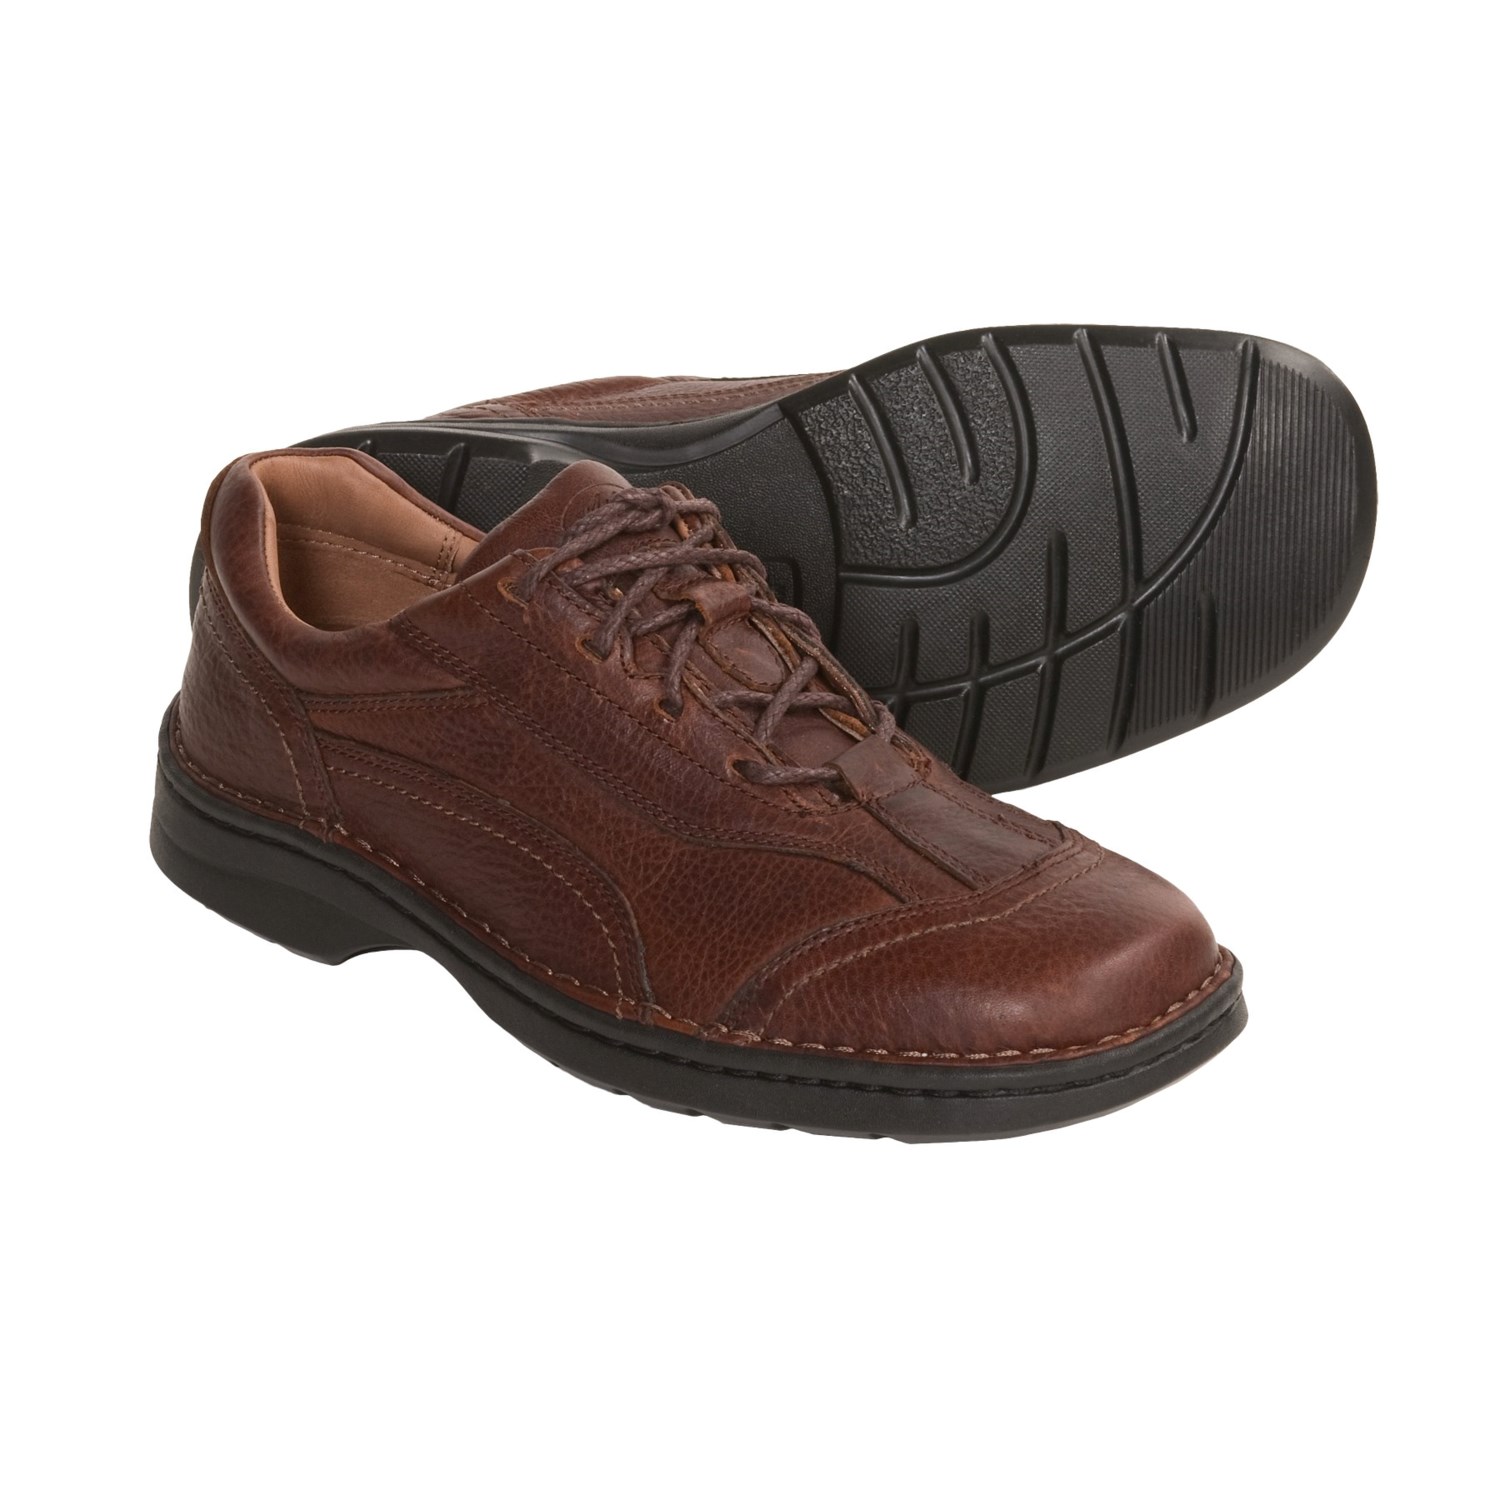 Neil M Pathfinder Oxford Shoes (For Men) 2880W - Save 40%